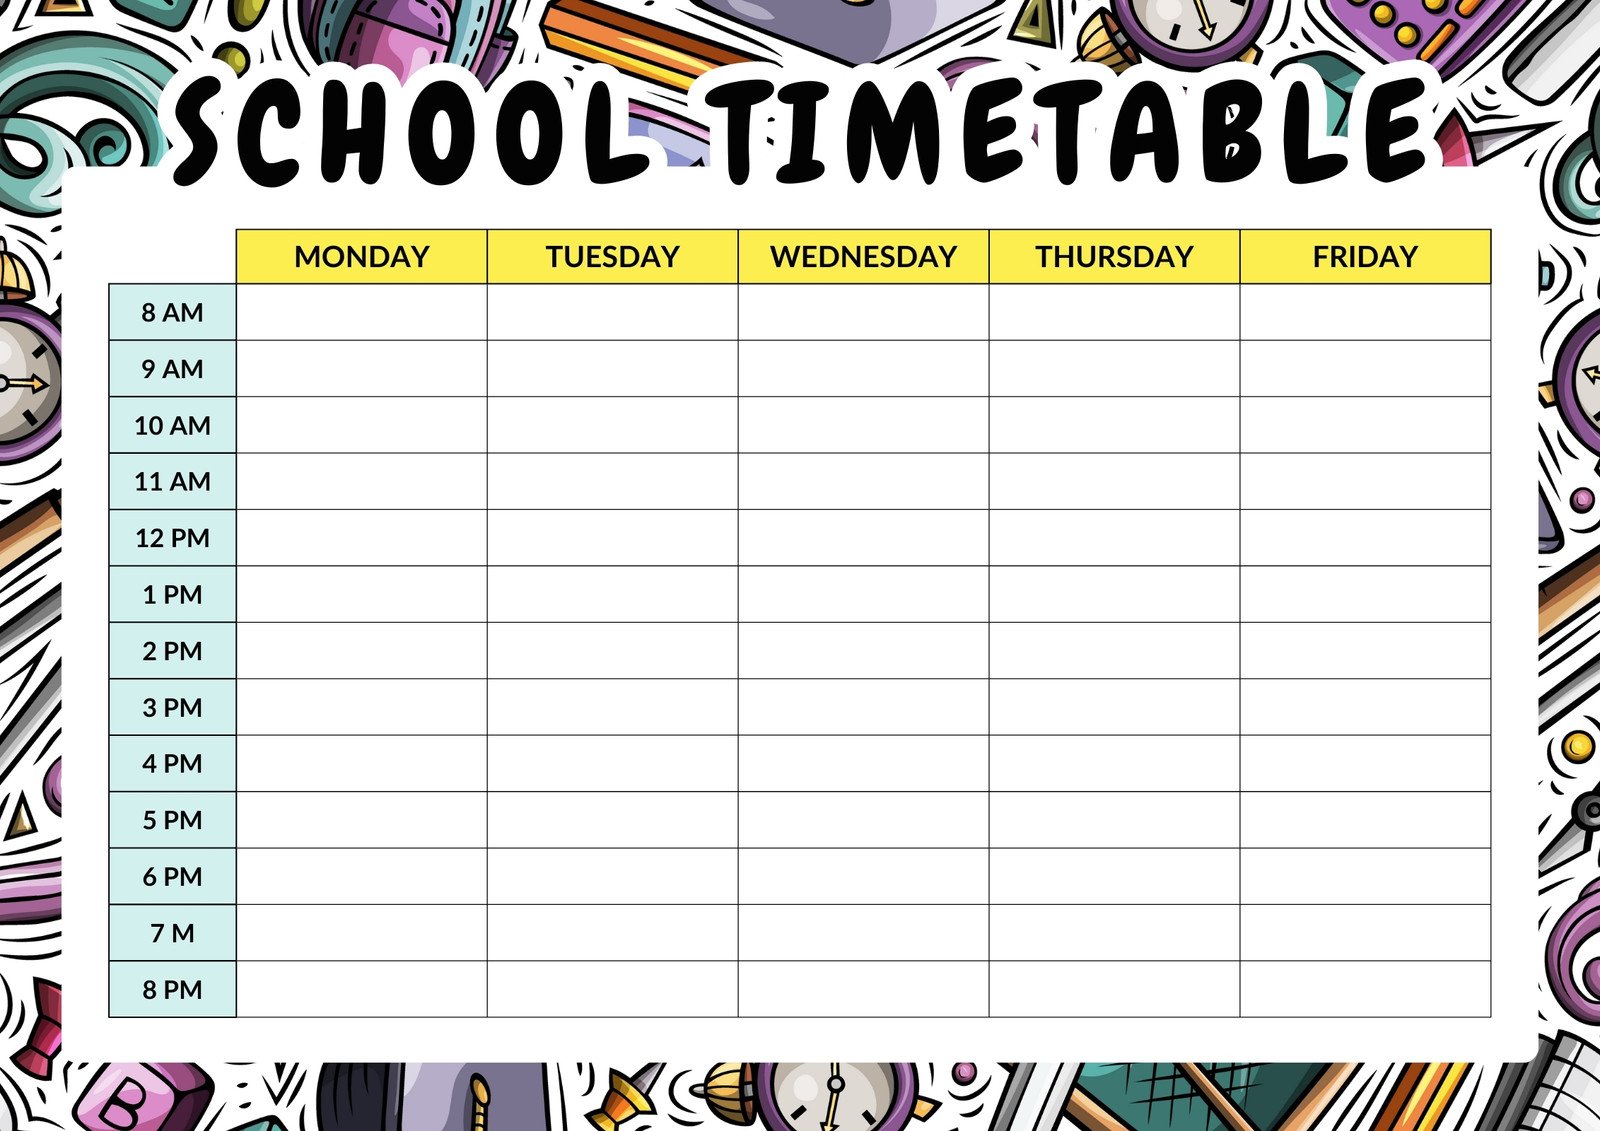 School Timetable Class Schedule in Multicolor Doodle Style